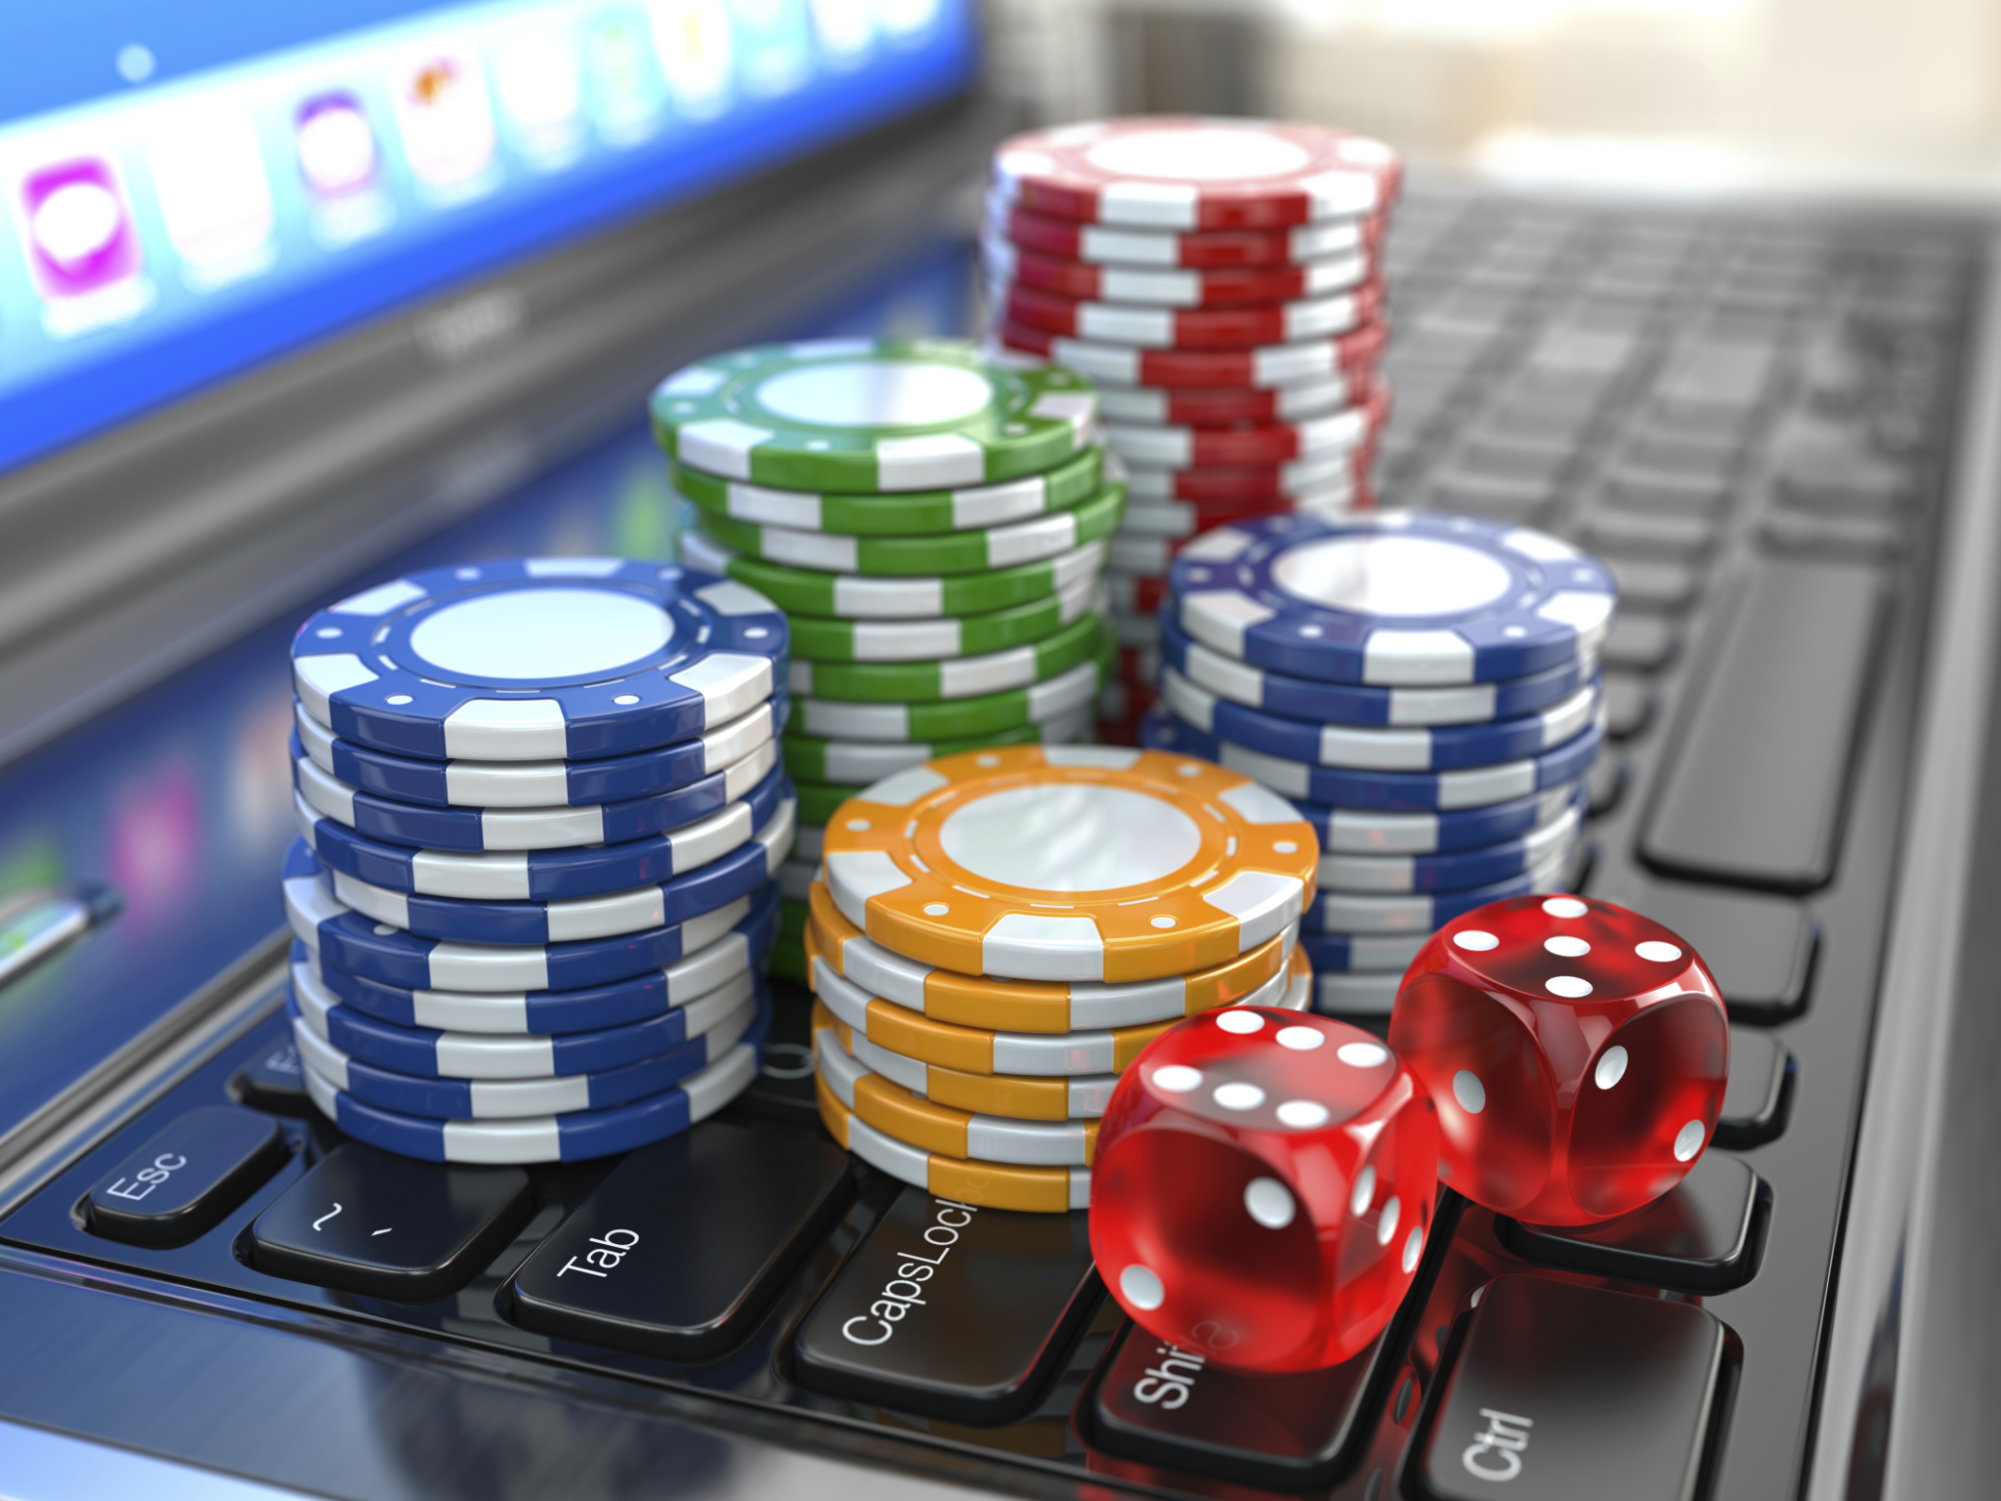 Have a look at various bonuses that can be attained at an online gambling site